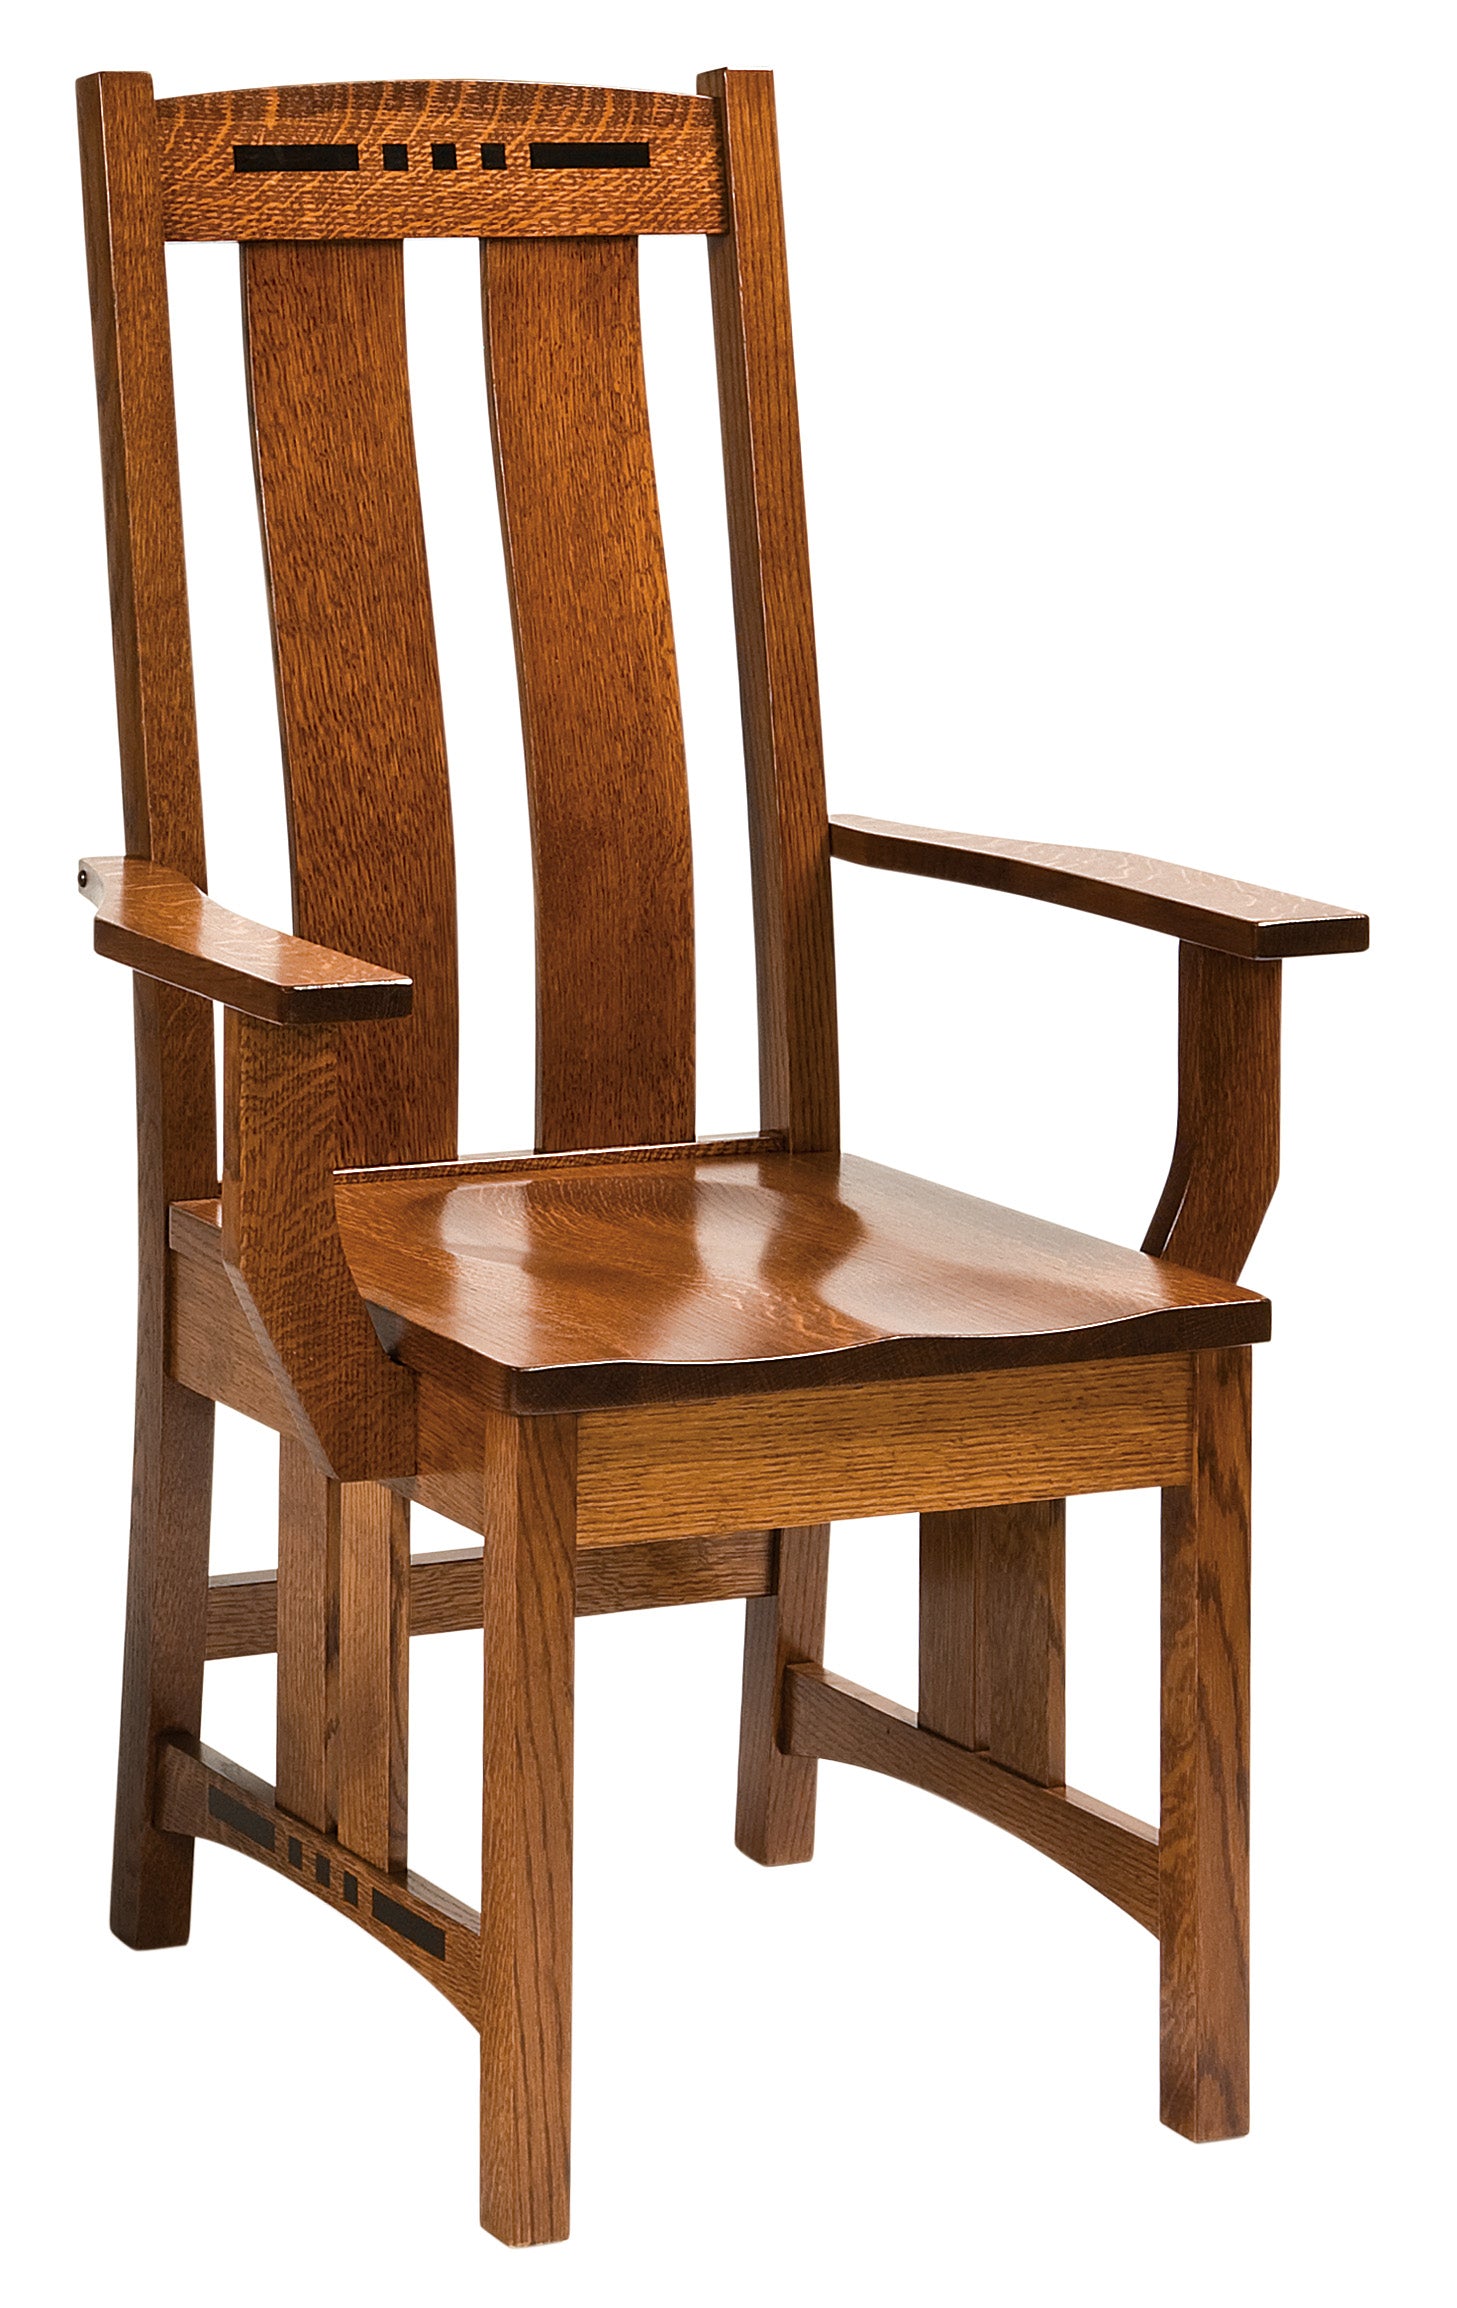 colebrook arm chair shown in quarter sawn white oak with michael's cherry stain